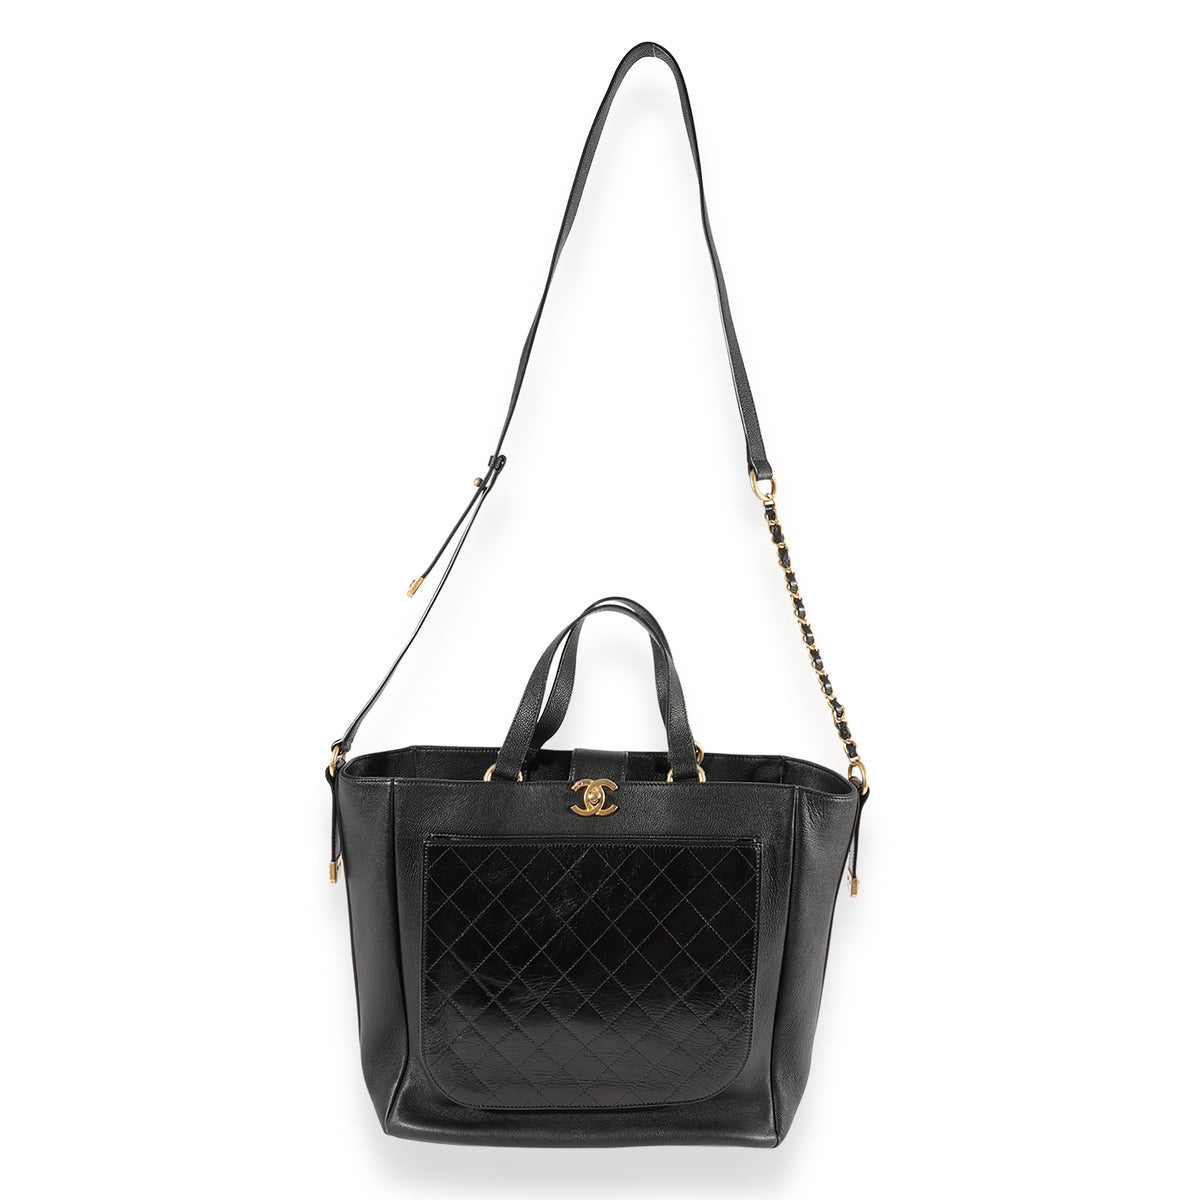 Chanel Black Quilted Calfskin Shopping Tote